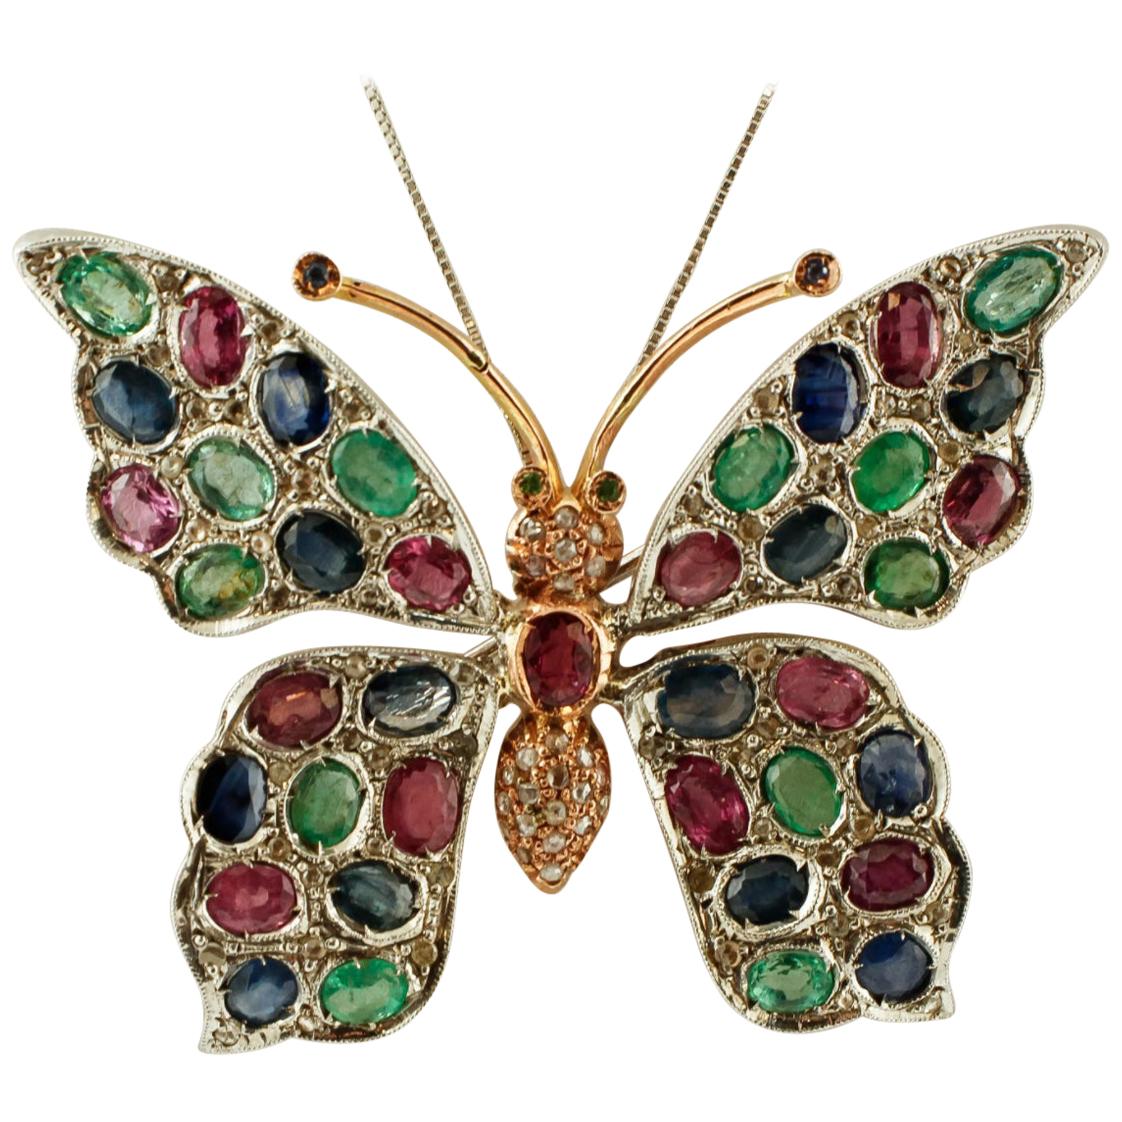 Diamonds Rubies Emeralds Sapphires, 9k Gold and Silver, Butterfly Pendant/Brooch